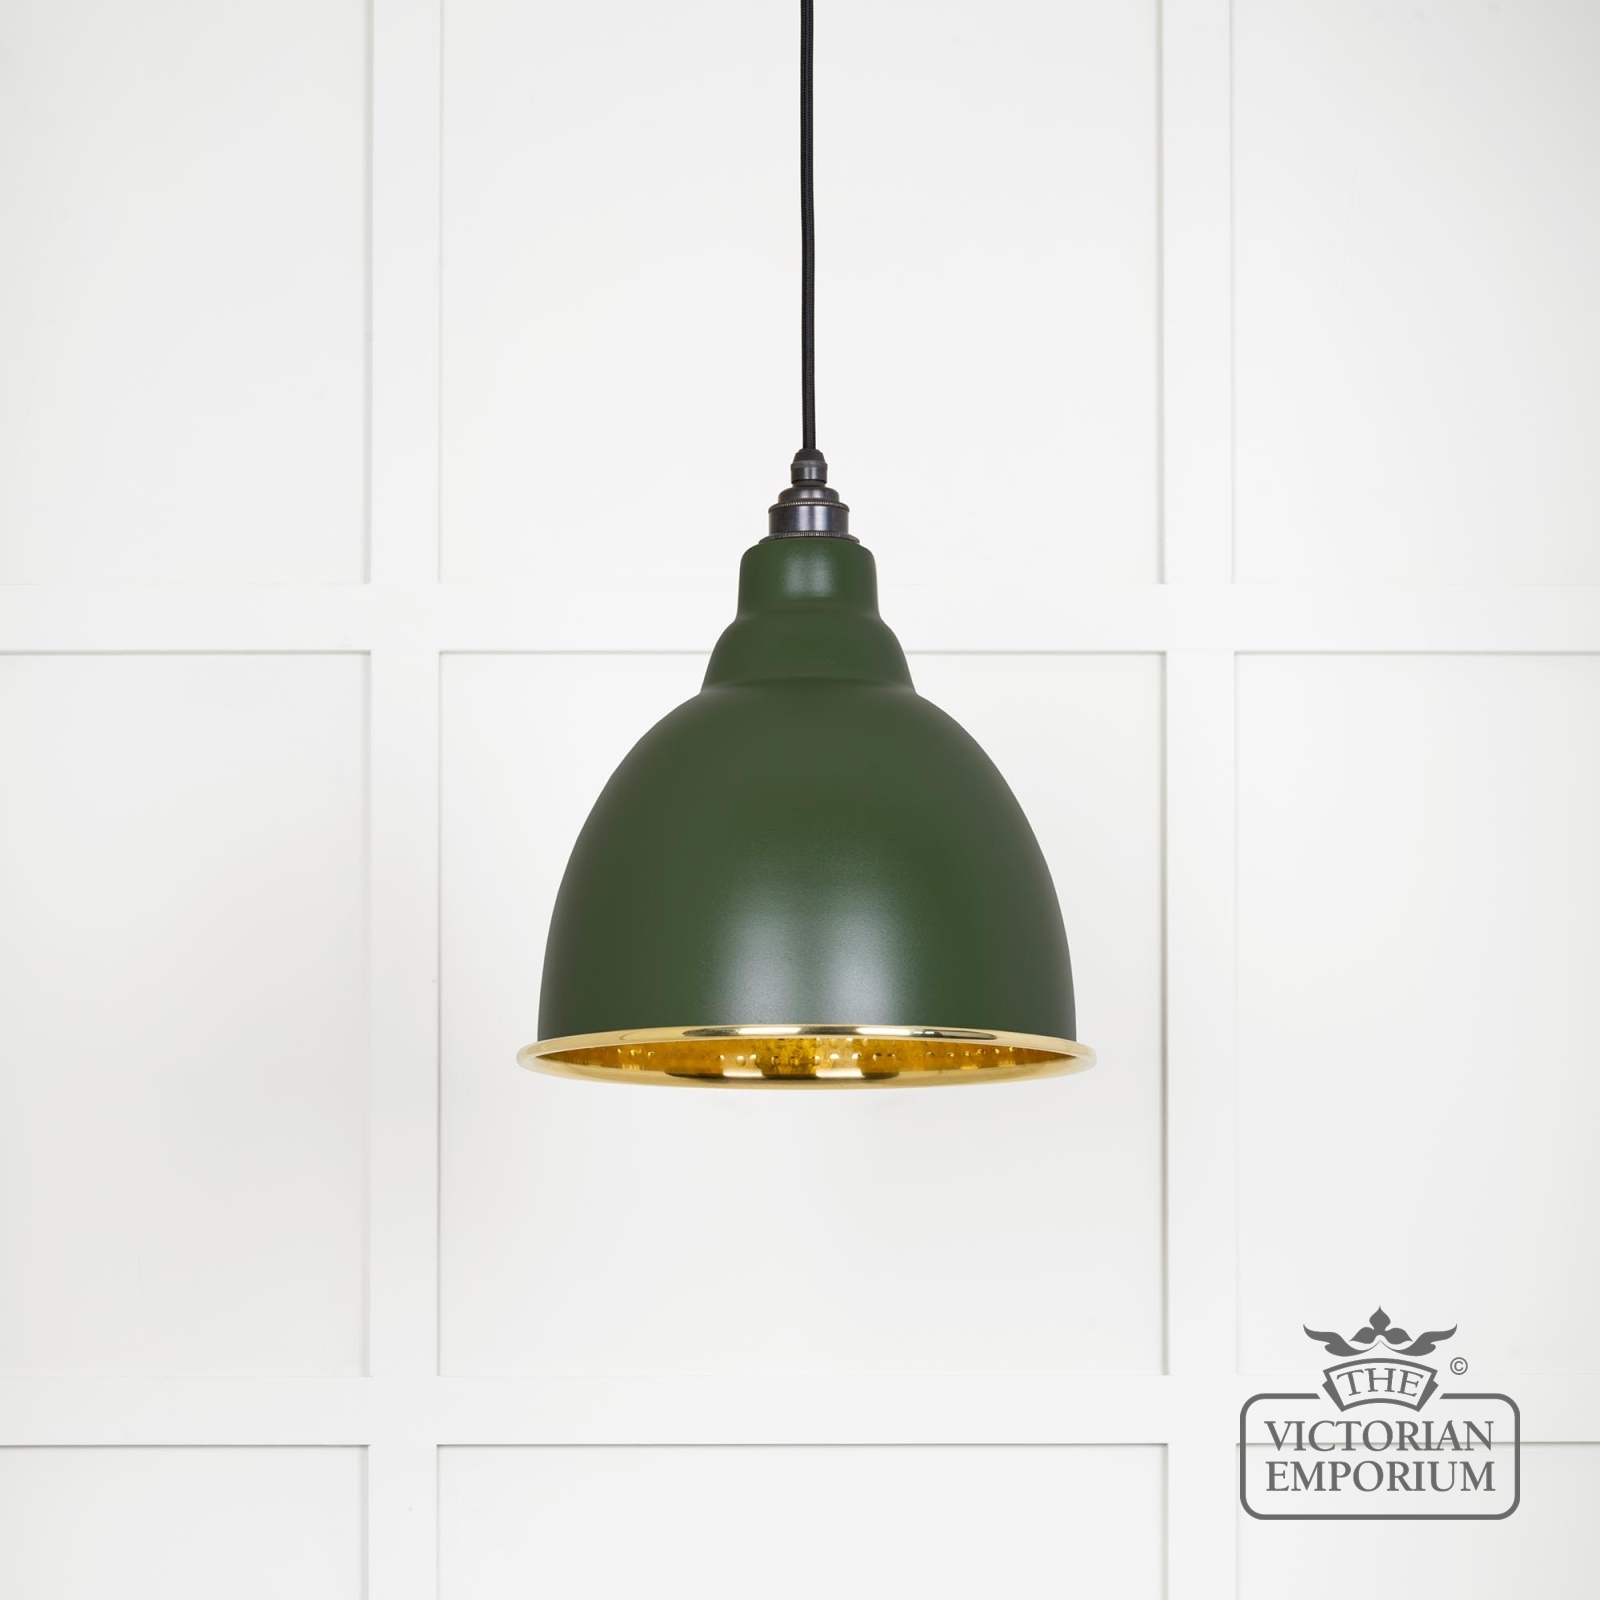 Brindle pendant light in Heath with hammered brass interior